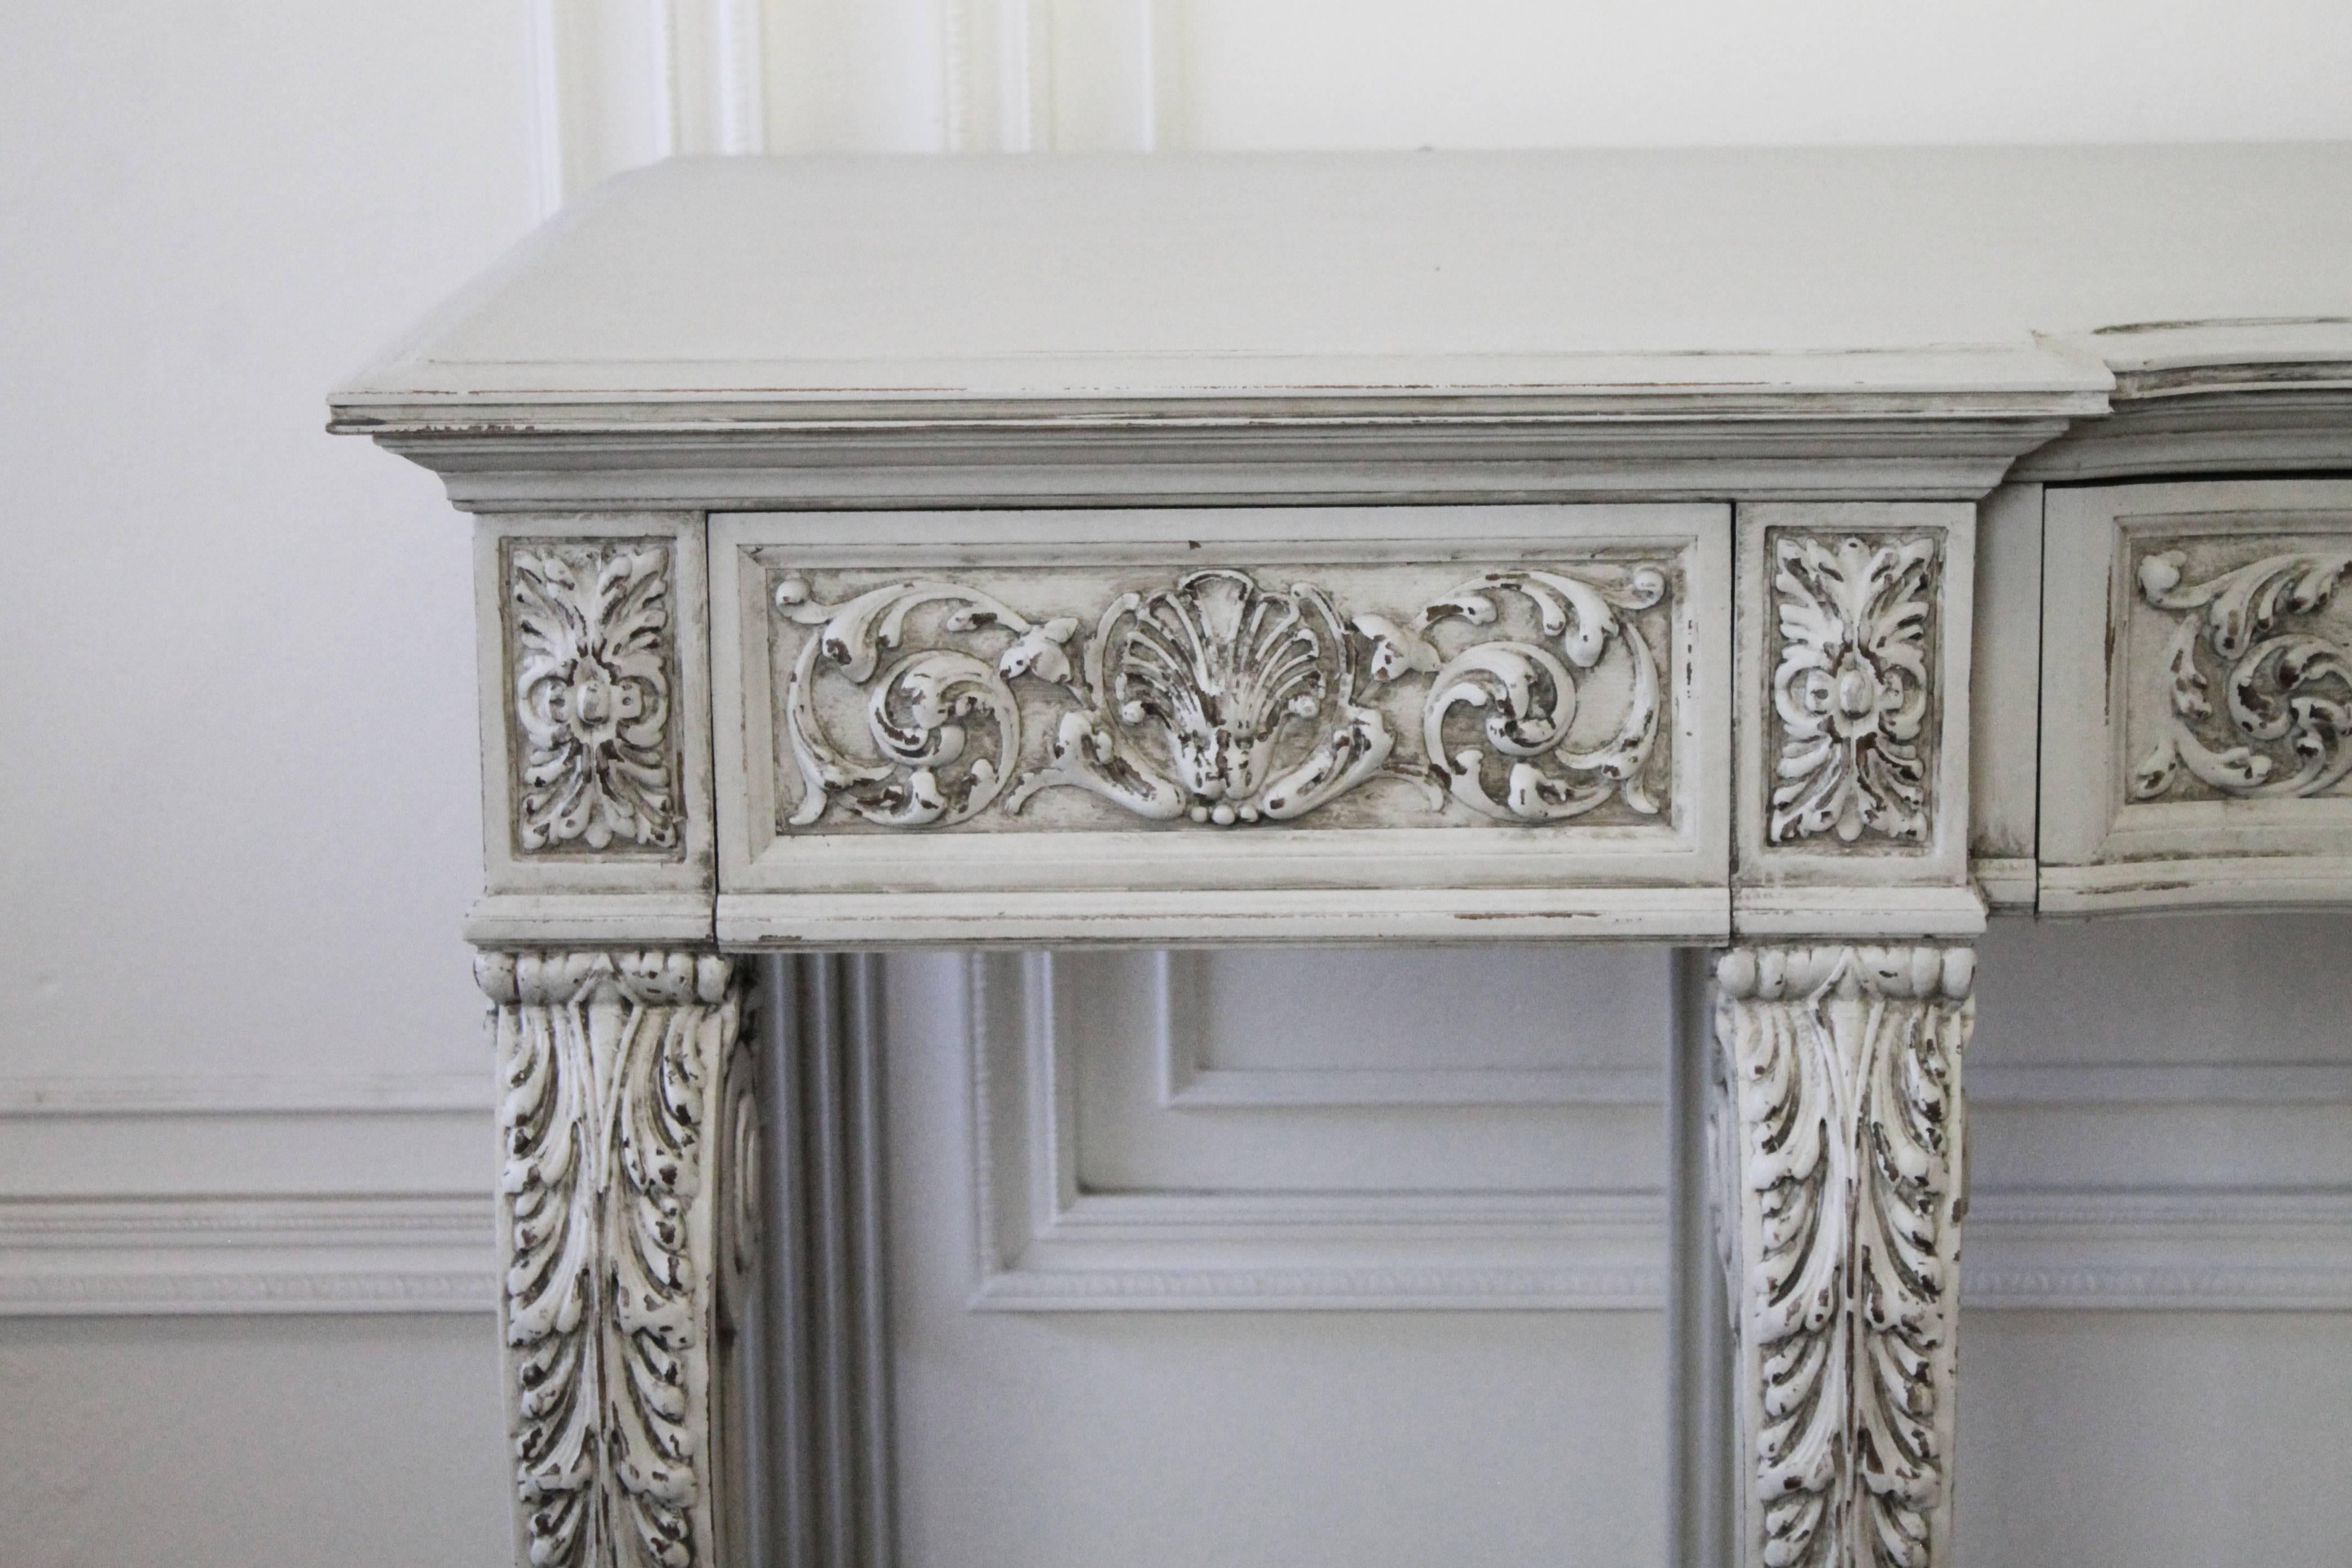 Constructed of solid walnut, with intricate carved clam shell, Rococo style carvings, and corbel shaped legs. This large wall server has three working drawers, constructed of solid wood, and dovetail finish.
The paint is a soft oyster white, with